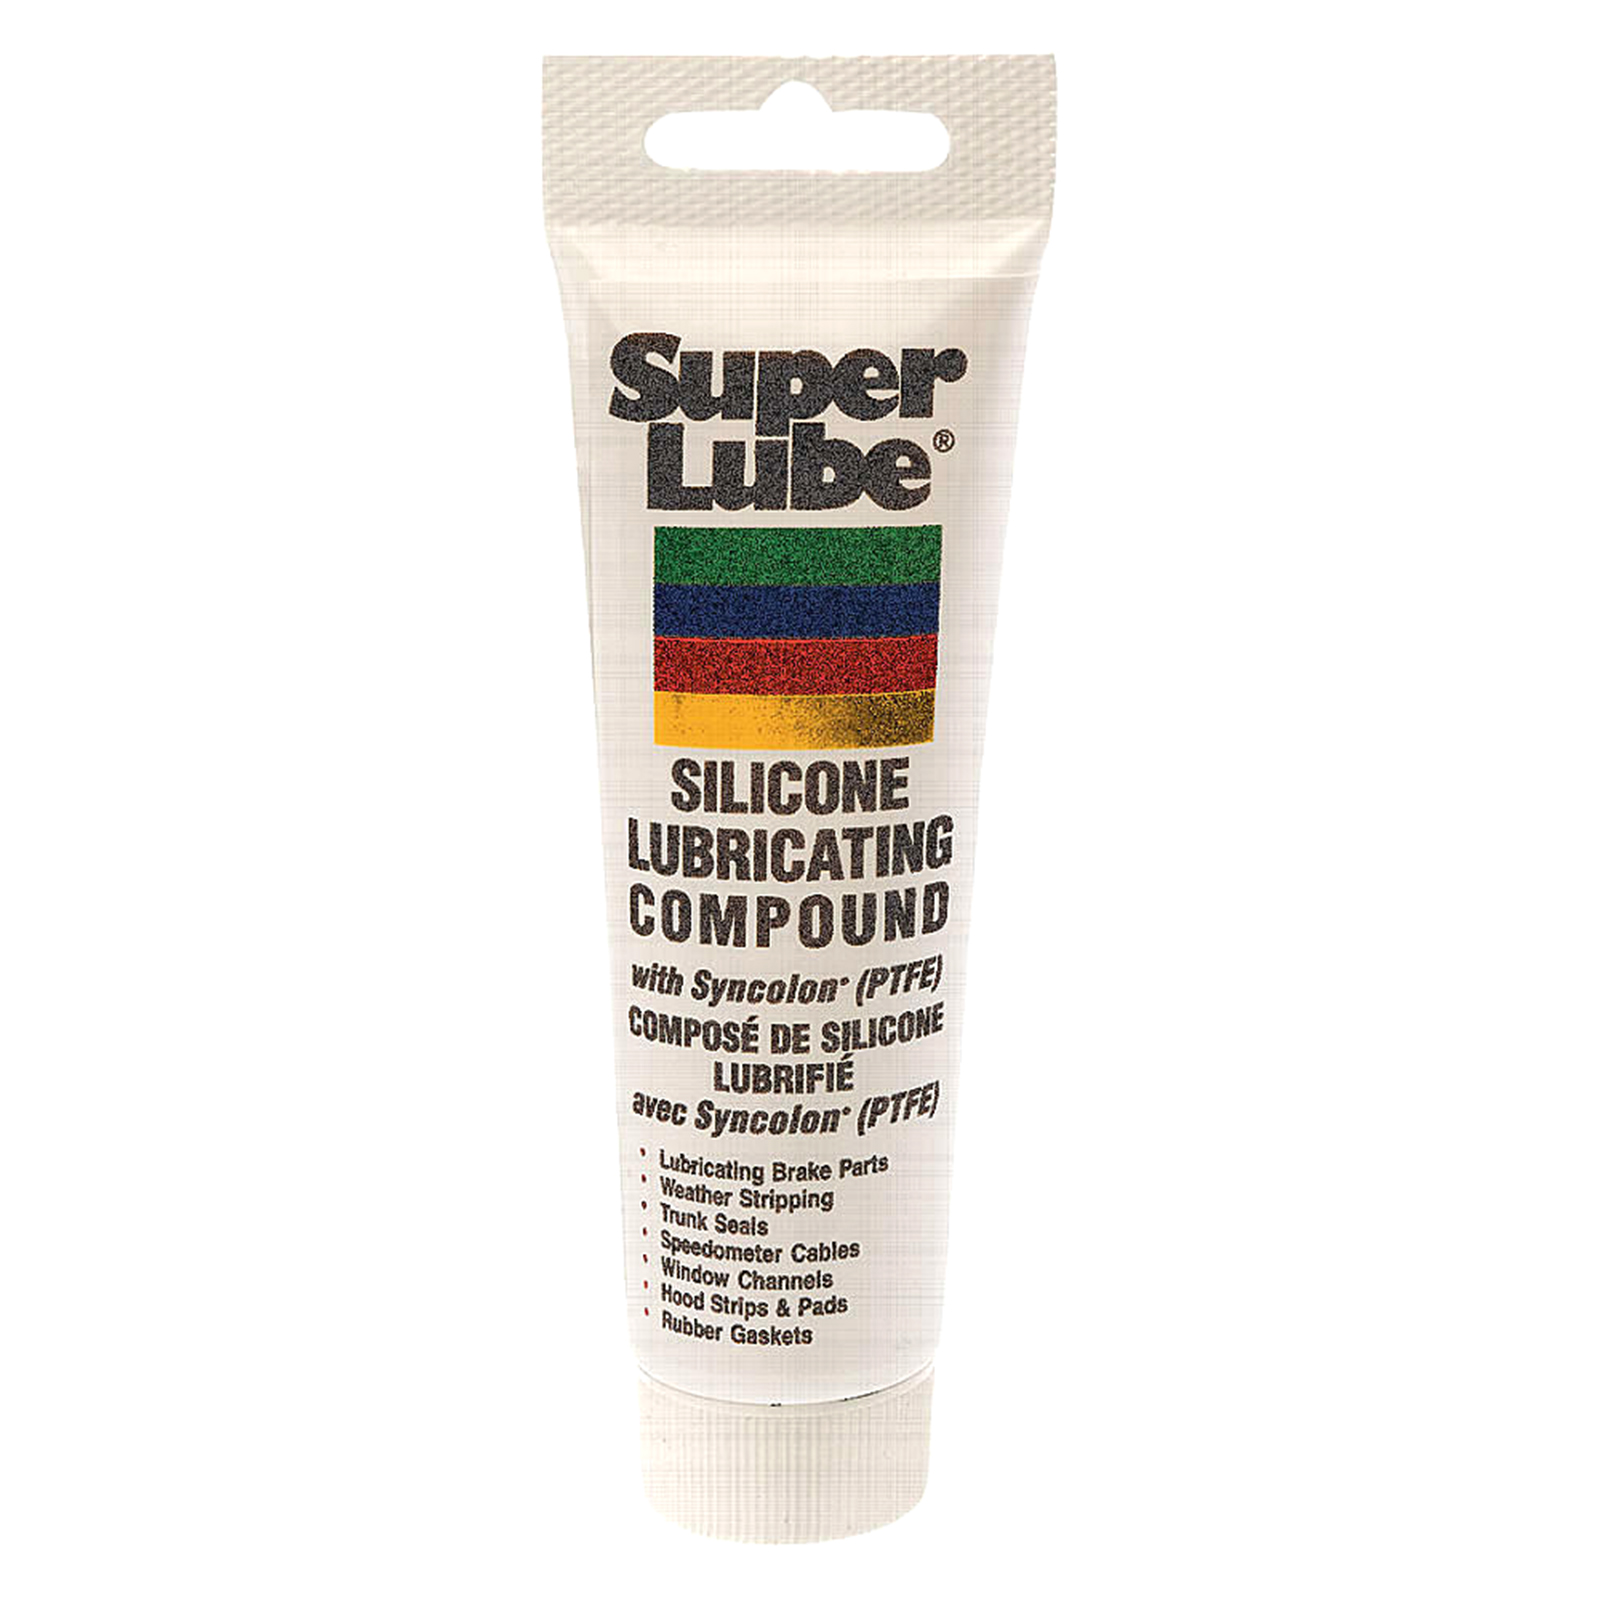 Super Lube 92003 3oz. Multipurpose Grease with PTFE Lubricant